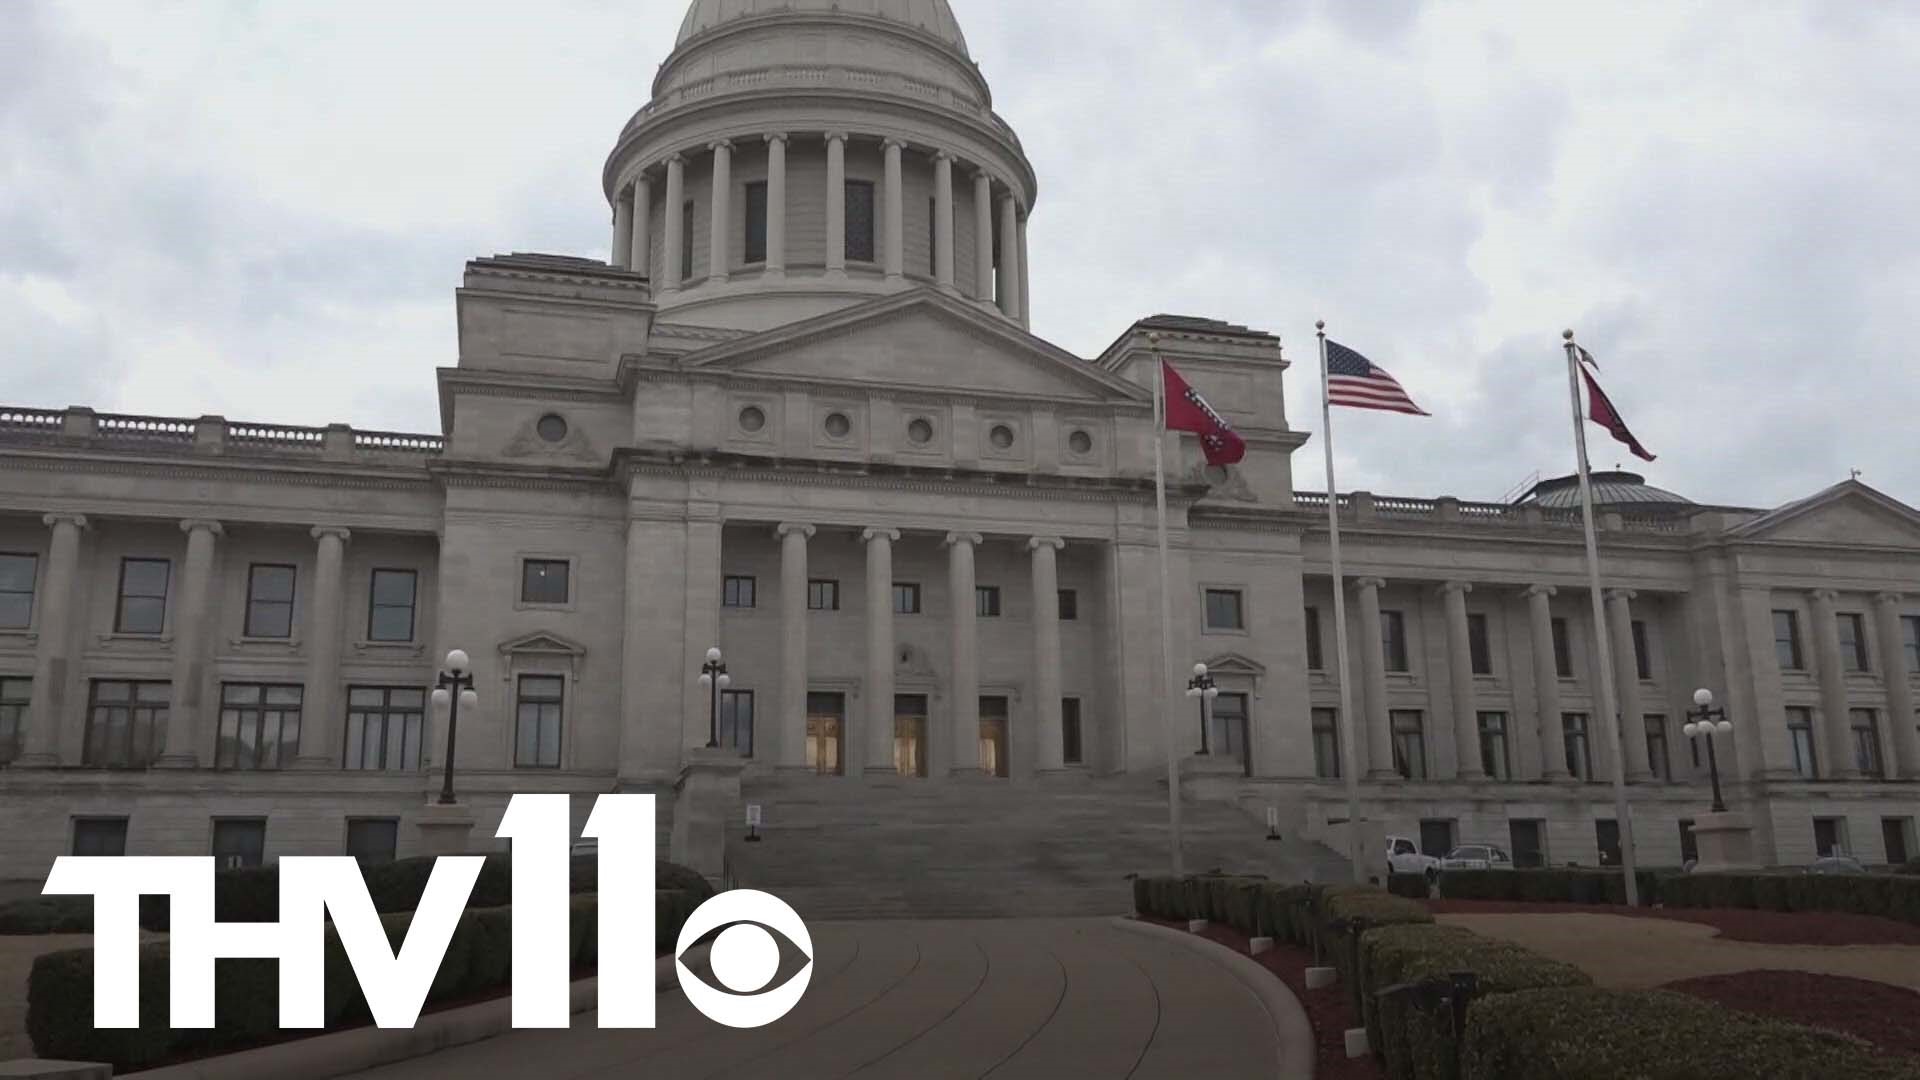 A measure to prohibit COVID-19 vaccine mandates has been making its way through the special session and will likely head to the governor's desk for approval today.